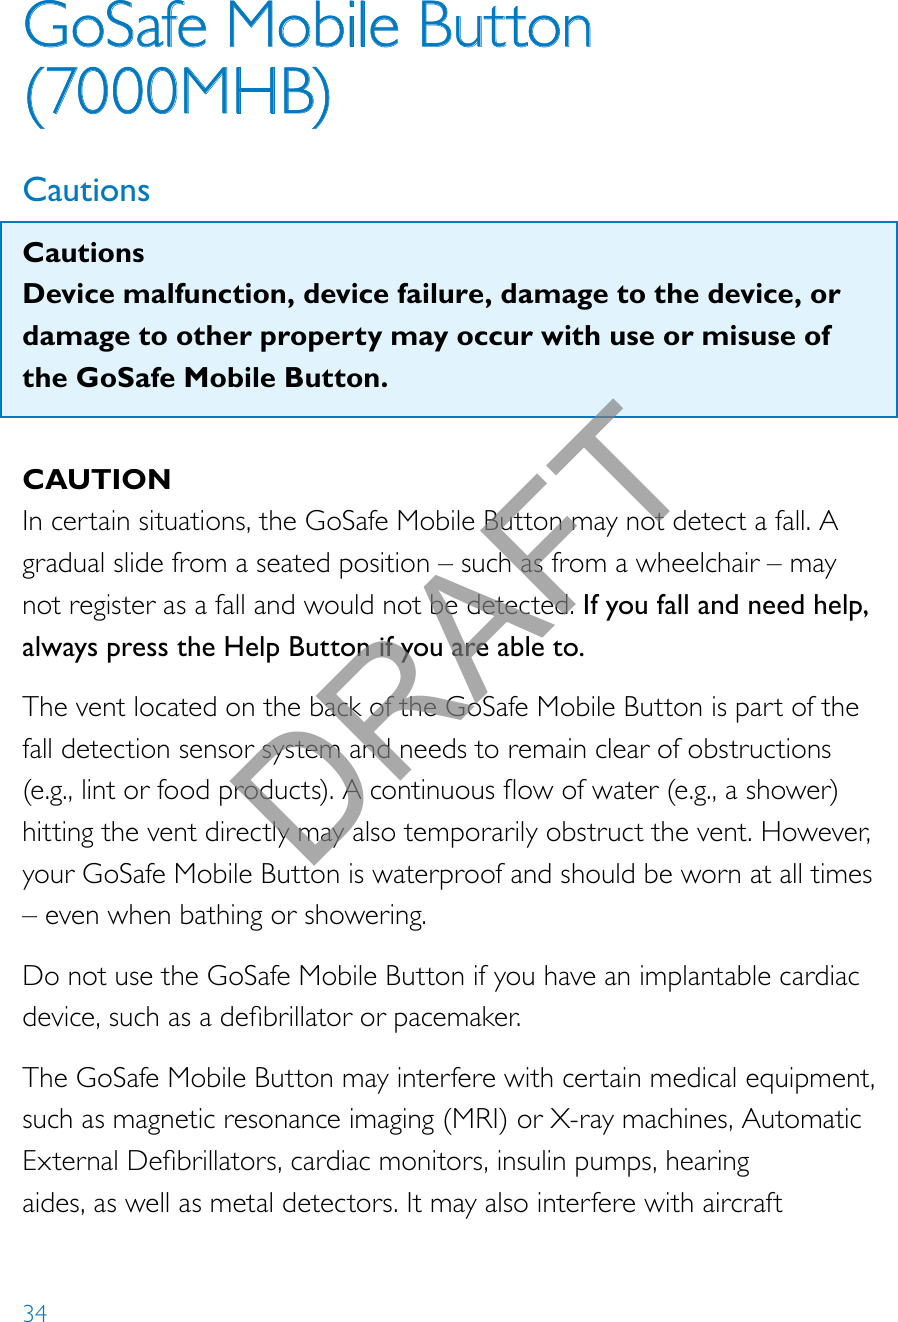 34GoSafe Mobile Button  (7000MHB)CautionsCautionsDevice malfunction, device failure, damage to the device, or damage to other property may occur with use or misuse of the GoSafe Mobile Button.CAUTIONIn certain situations, the GoSafe Mobile Button may not detect a fall. A gradual slide from a seated position – such as from a wheelchair – may not register as a fall and would not be detected. If you fall and need help, always press the Help Button if you are able to.The vent located on the back of the GoSafe Mobile Button is part of the fall detection sensor system and needs to remain clear of obstructions  (e.g.,lintorfoodproducts).Acontinuousowofwater(e.g.,ashower)hitting the vent directly may also temporarily obstruct the vent. However, your GoSafe Mobile Button is waterproof and should be worn at all times – even when bathing or showering.Do not use the GoSafe Mobile Button if you have an implantable cardiac device,suchasadebrillatororpacemaker.The GoSafe Mobile Button may interfere with certain medical equipment, such as magnetic resonance imaging (MRI) or X-ray machines, Automatic ExternalDebrillators,cardiacmonitors,insulinpumps,hearingaides, as well as metal detectors. It may also interfere with aircraft DRAFT